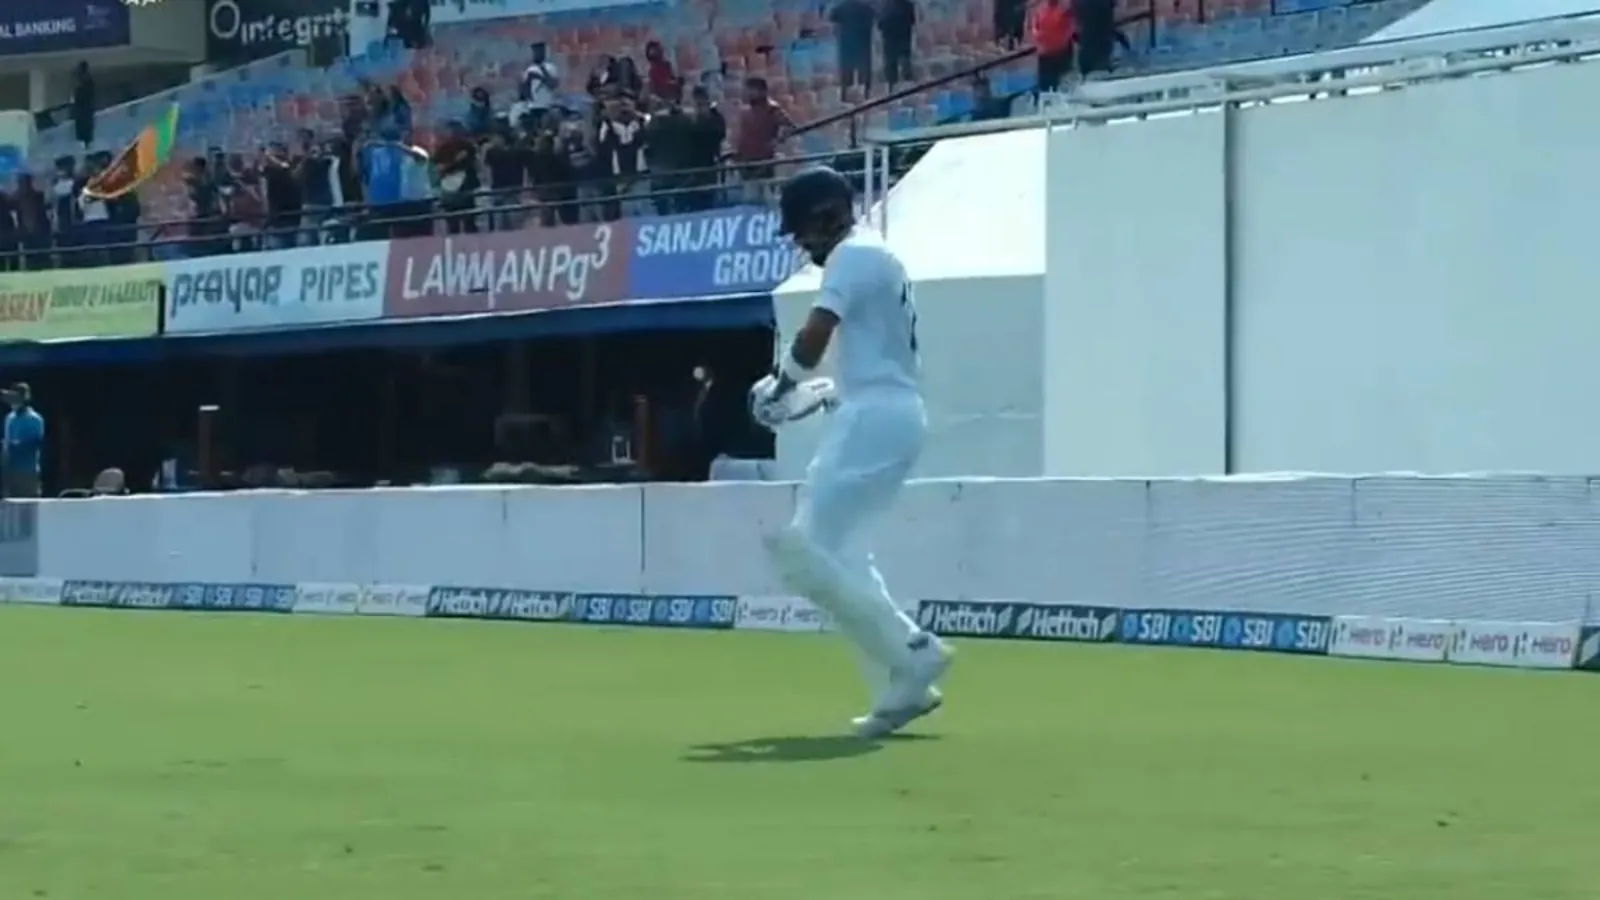 IND vs SL: Mohali crowd welcomes Virat Kohli with innovative chants for his 100th Test – WATCH